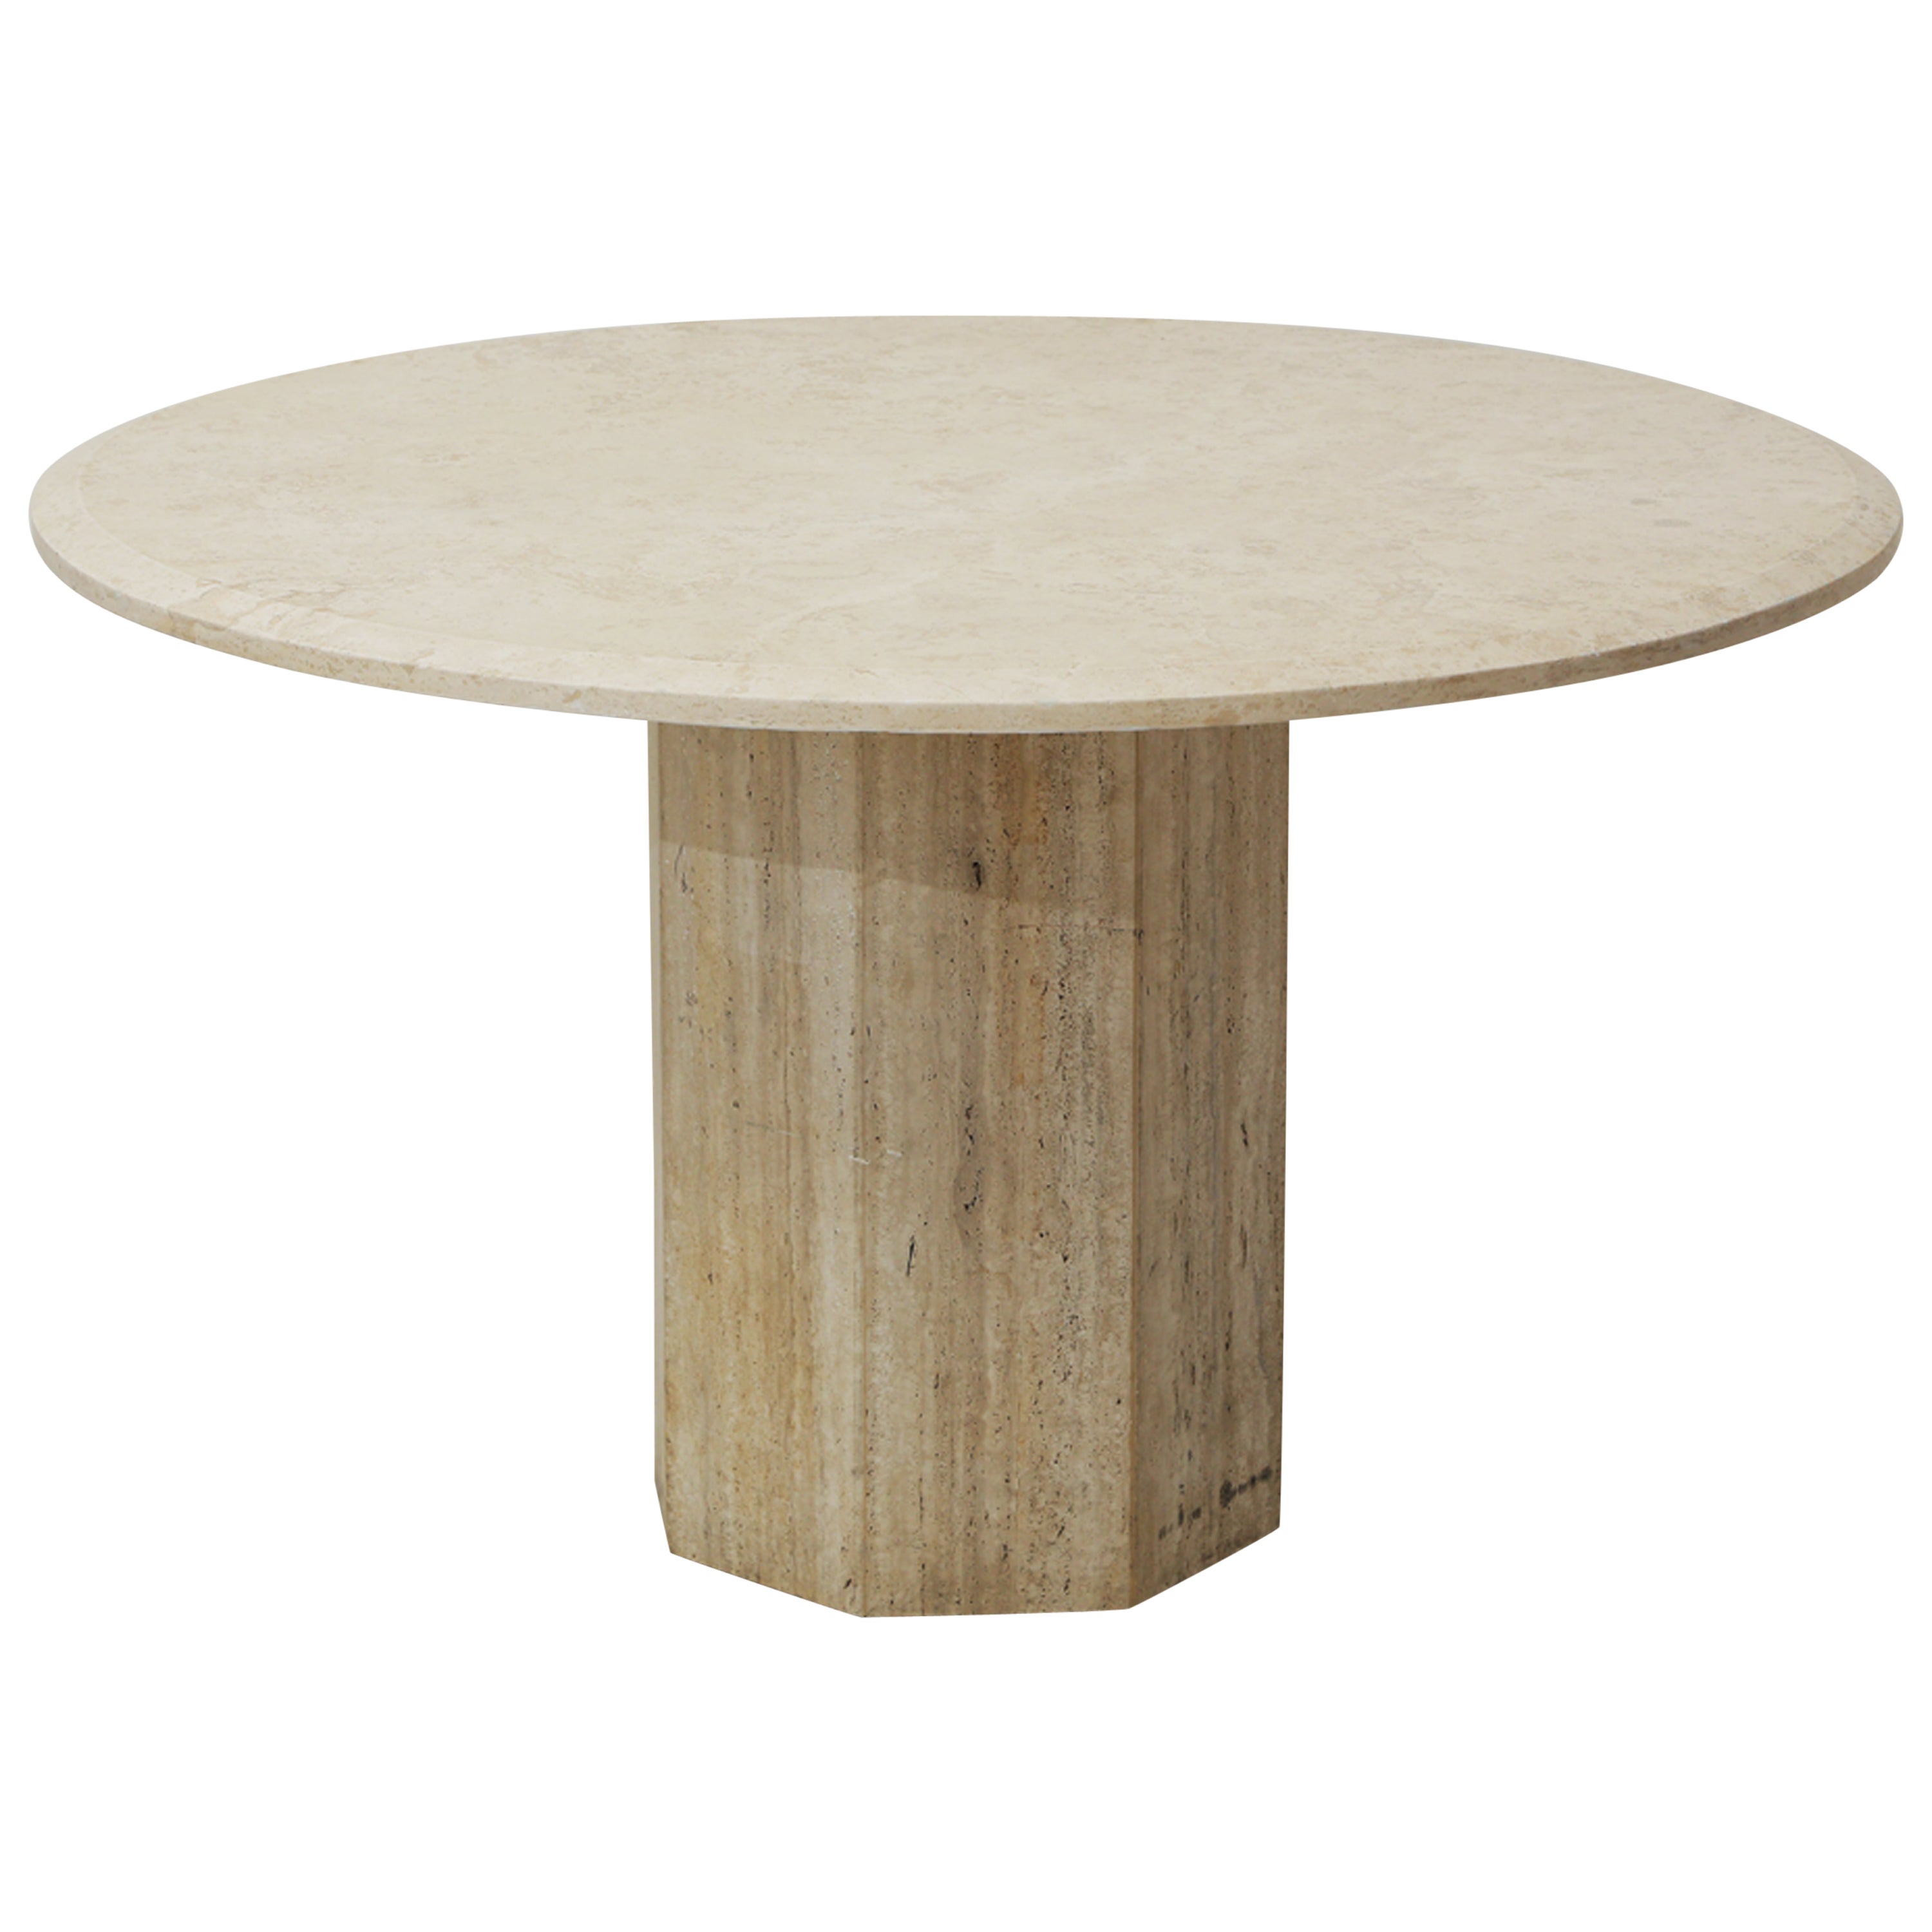 Travertine and White Oak Center Table For Sale at 1stDibs